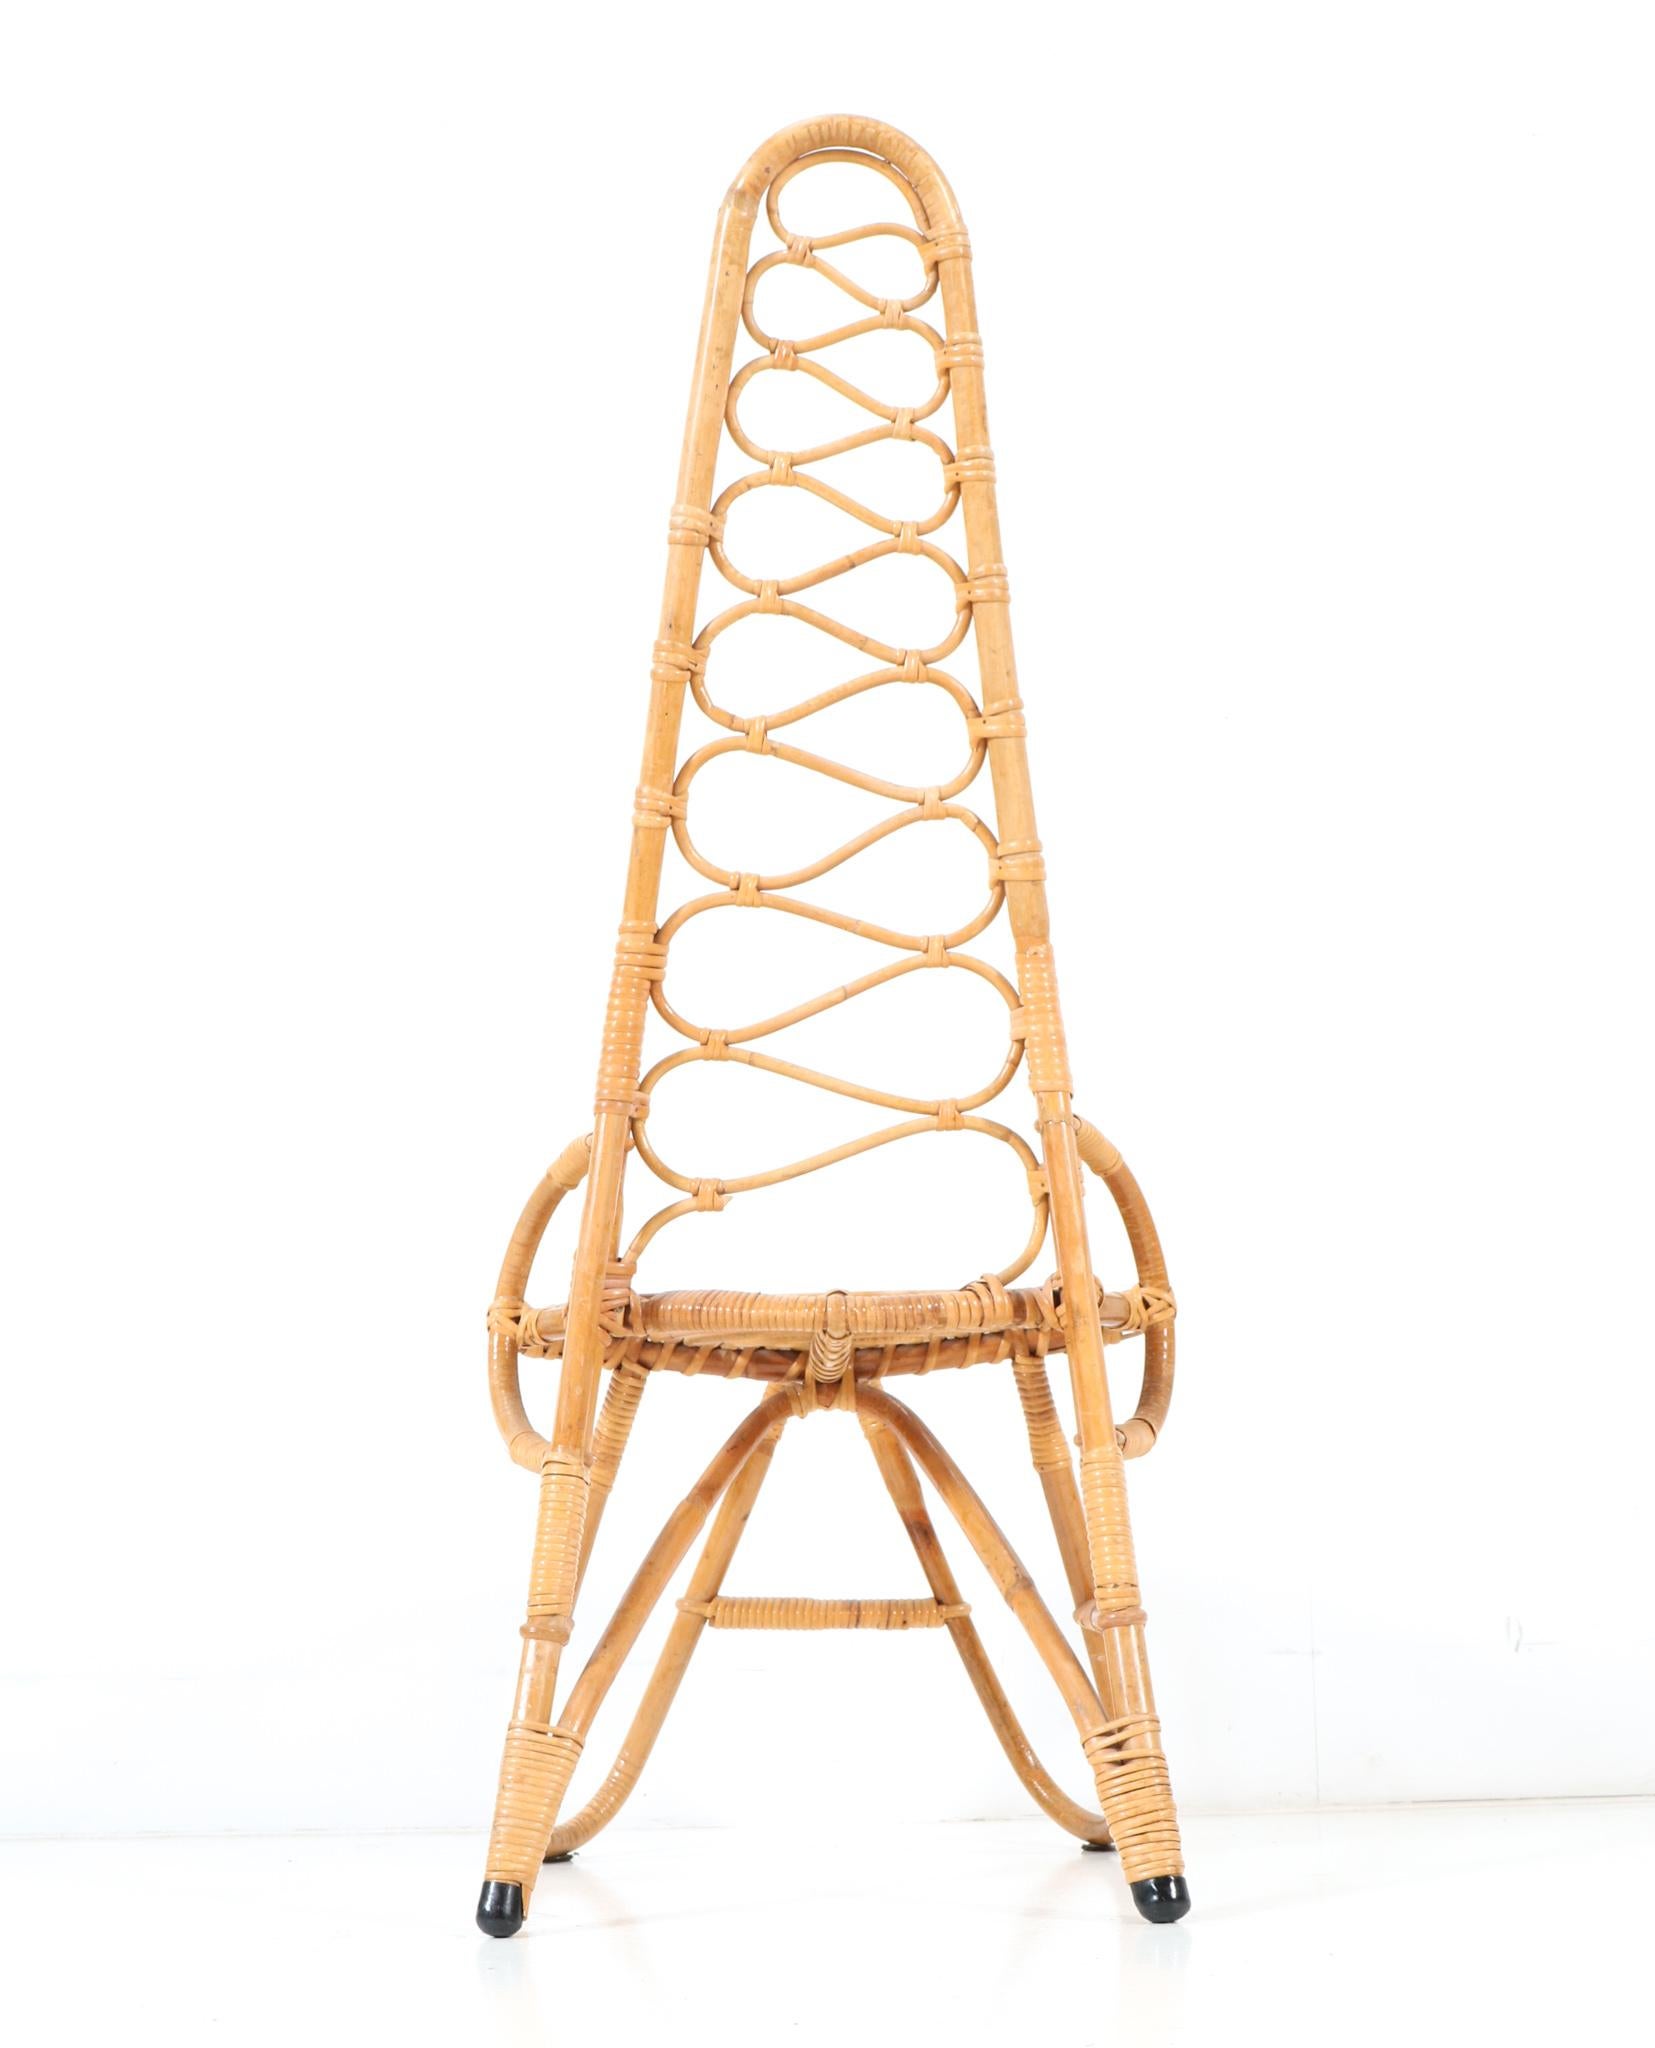 Mid-Century Modern Bamboo and Rattan Chair by Dirk van Sliedrecht for Rohe 1